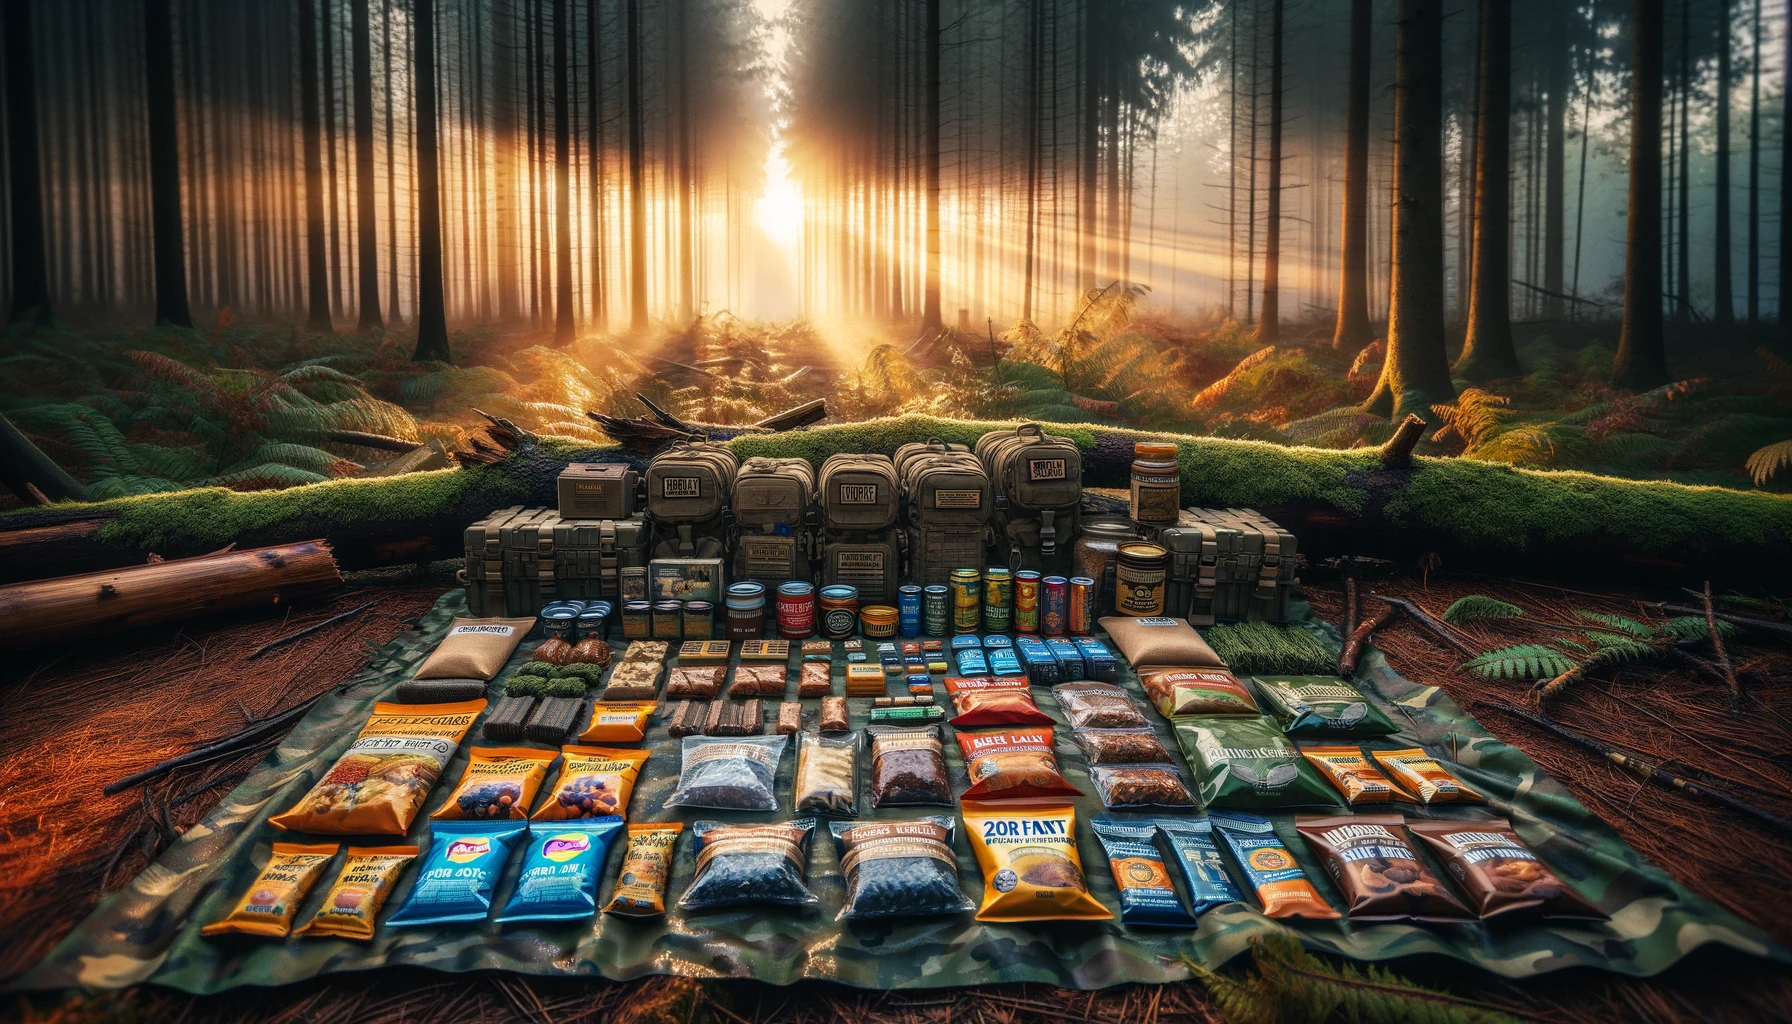 Essential food and water rations for 72-hour survival displayed on a camouflaged tarp in a forest clearing at dawn, including high-calorie meal packs, energy bars, dried fruits, nuts, emergency water packets, and portable filters. The early morning light casts a warm glow over the items, emphasizing their importance for sustaining life in survival situations. The serene yet urgent setting in the dense forest symbolizes isolation and challenges, while the dawn signifies hope, underscoring the critical need for proper preparation with food and water supplies for wilderness survival